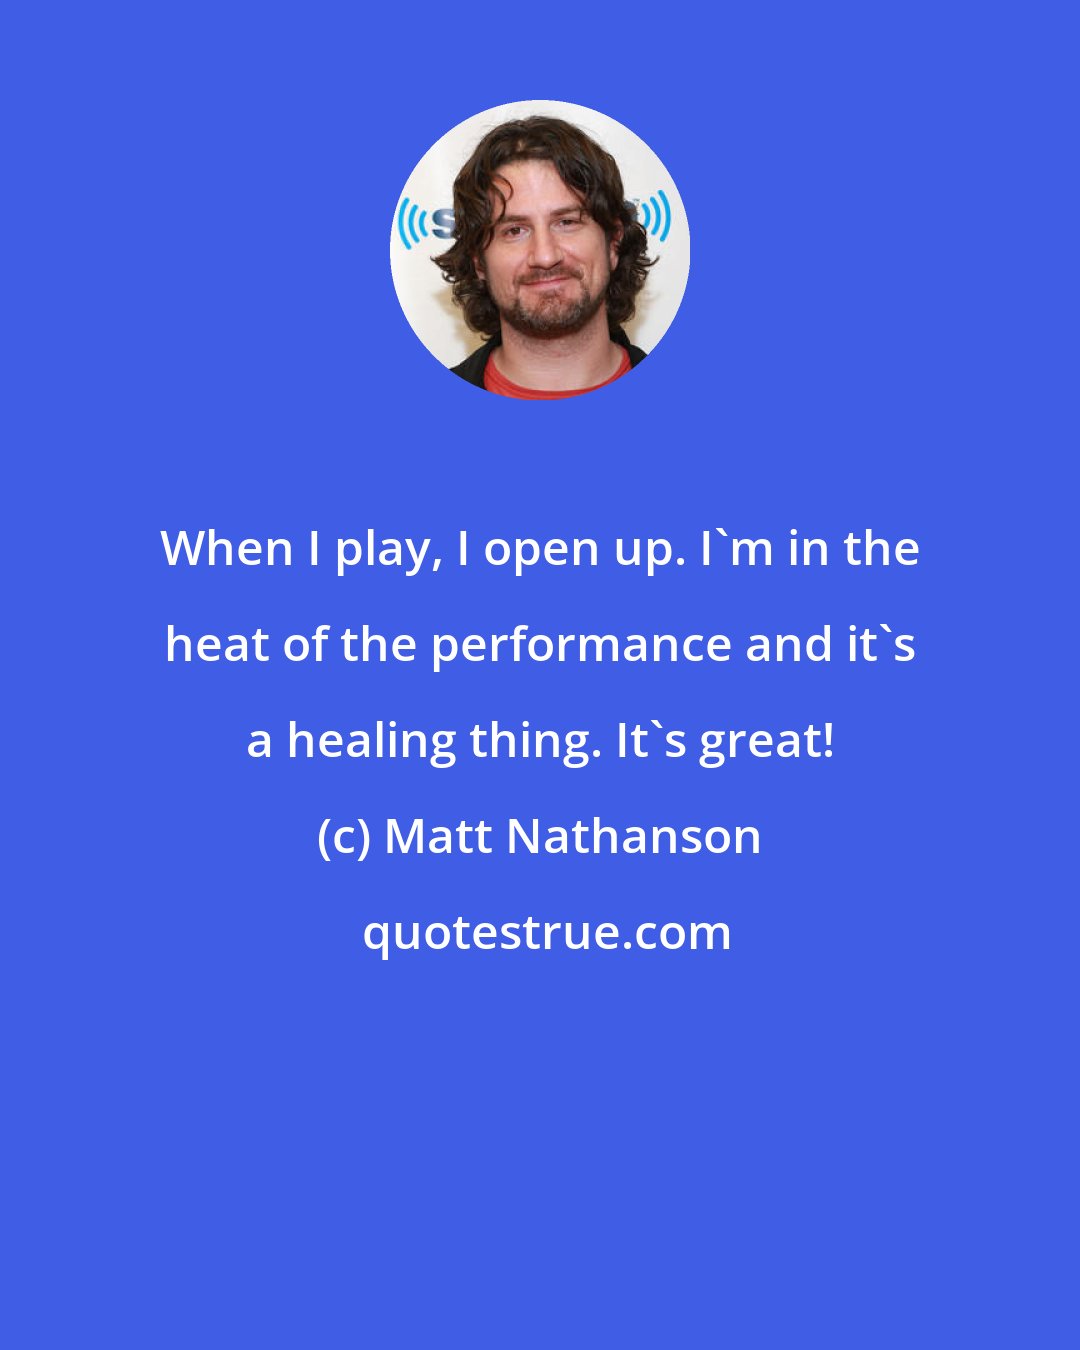 Matt Nathanson: When I play, I open up. I'm in the heat of the performance and it's a healing thing. It's great!